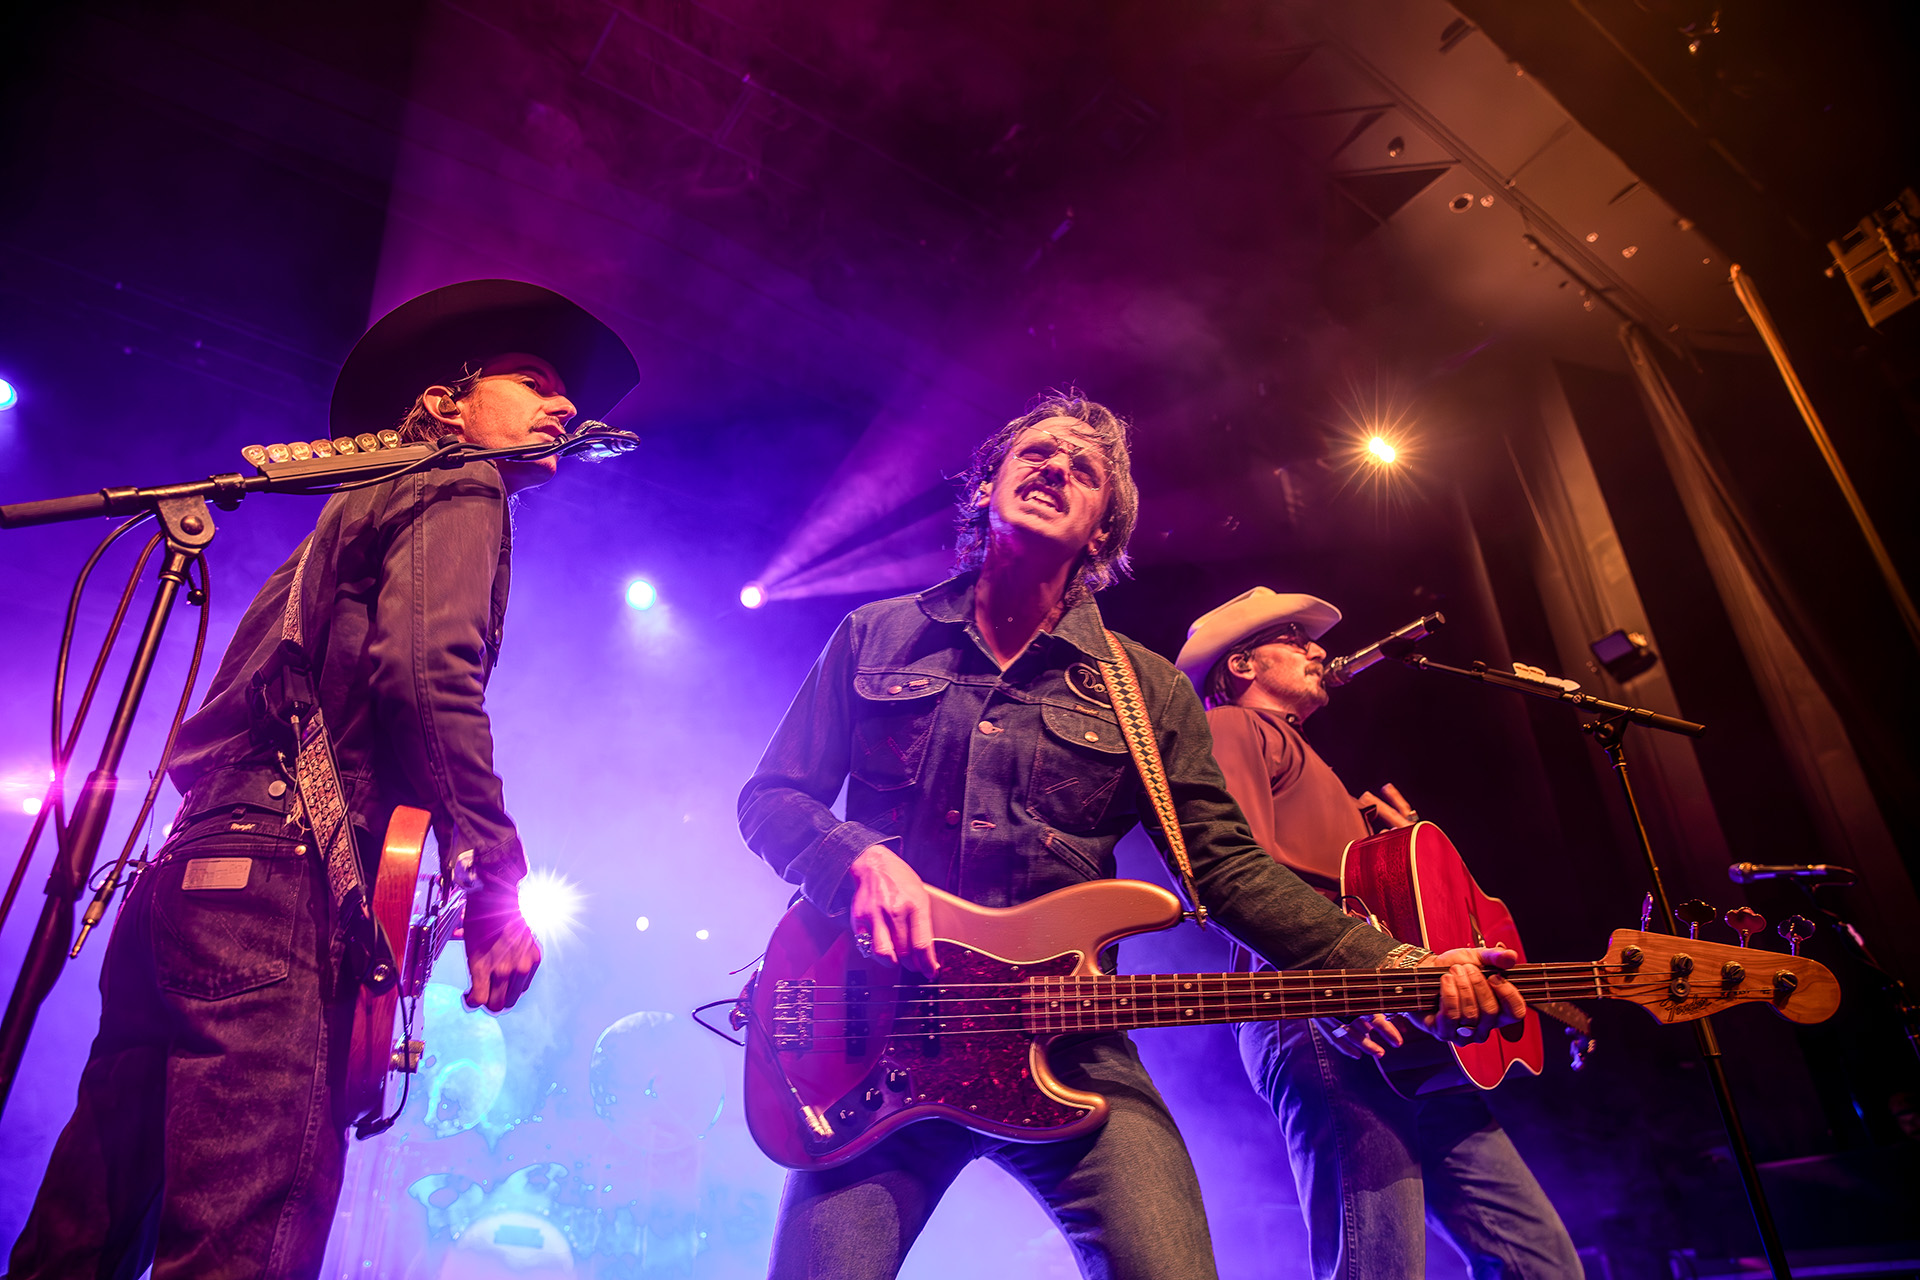 GIG REVIEW: Midland's Aus Tour Finale at Enmore Theatre | A Night of Country Charm & Music Unity